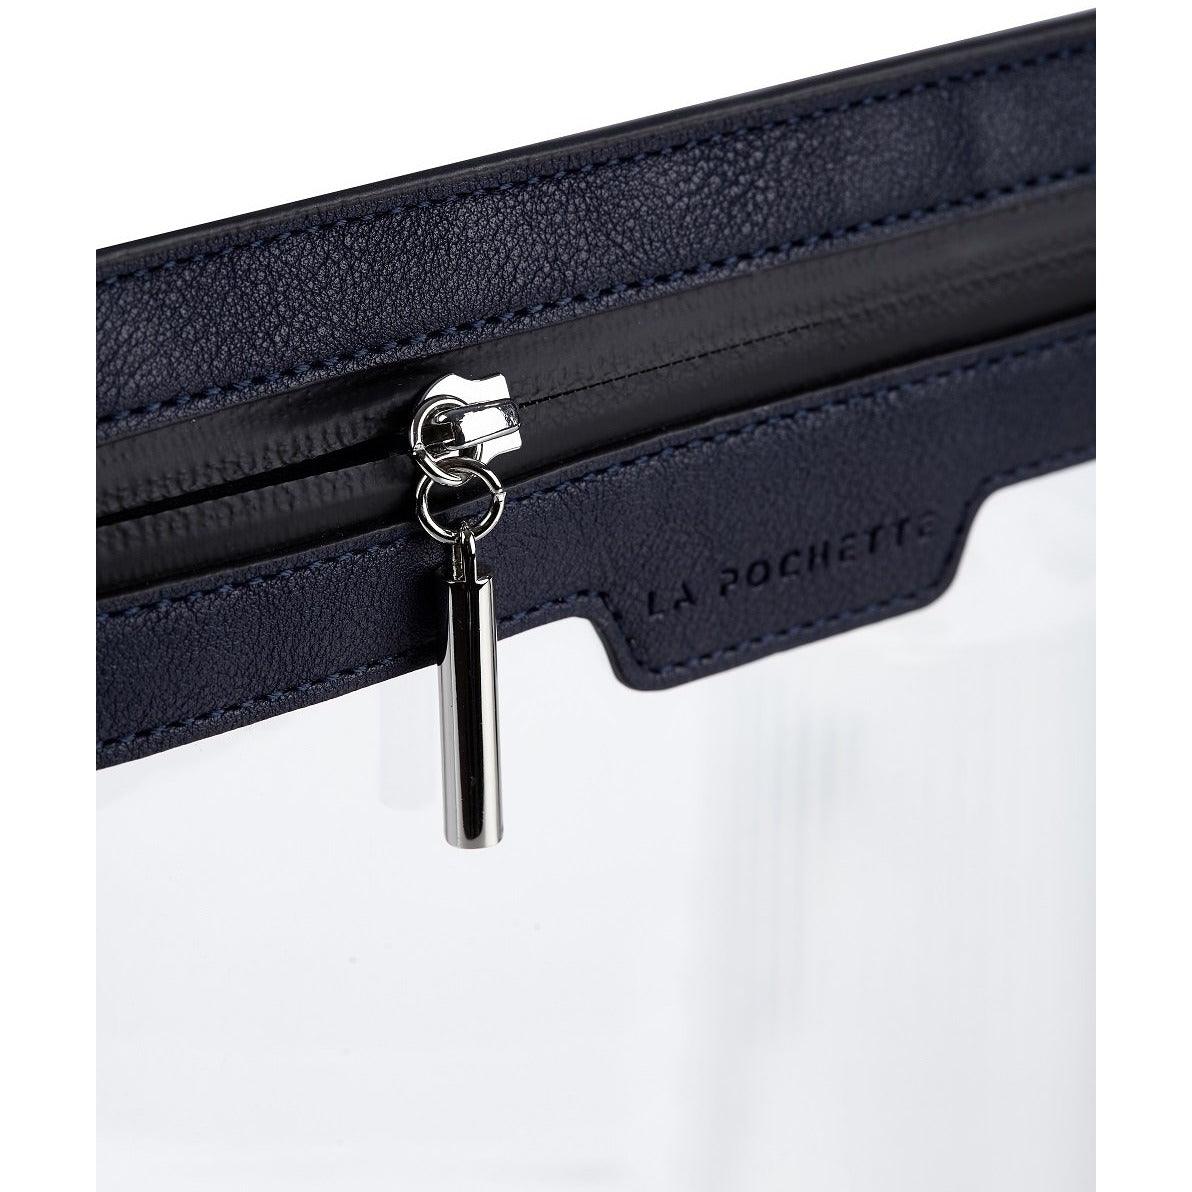 Close up of the zip and side on the Anywhere Everywhere Wallet in Midnight Ink colourway